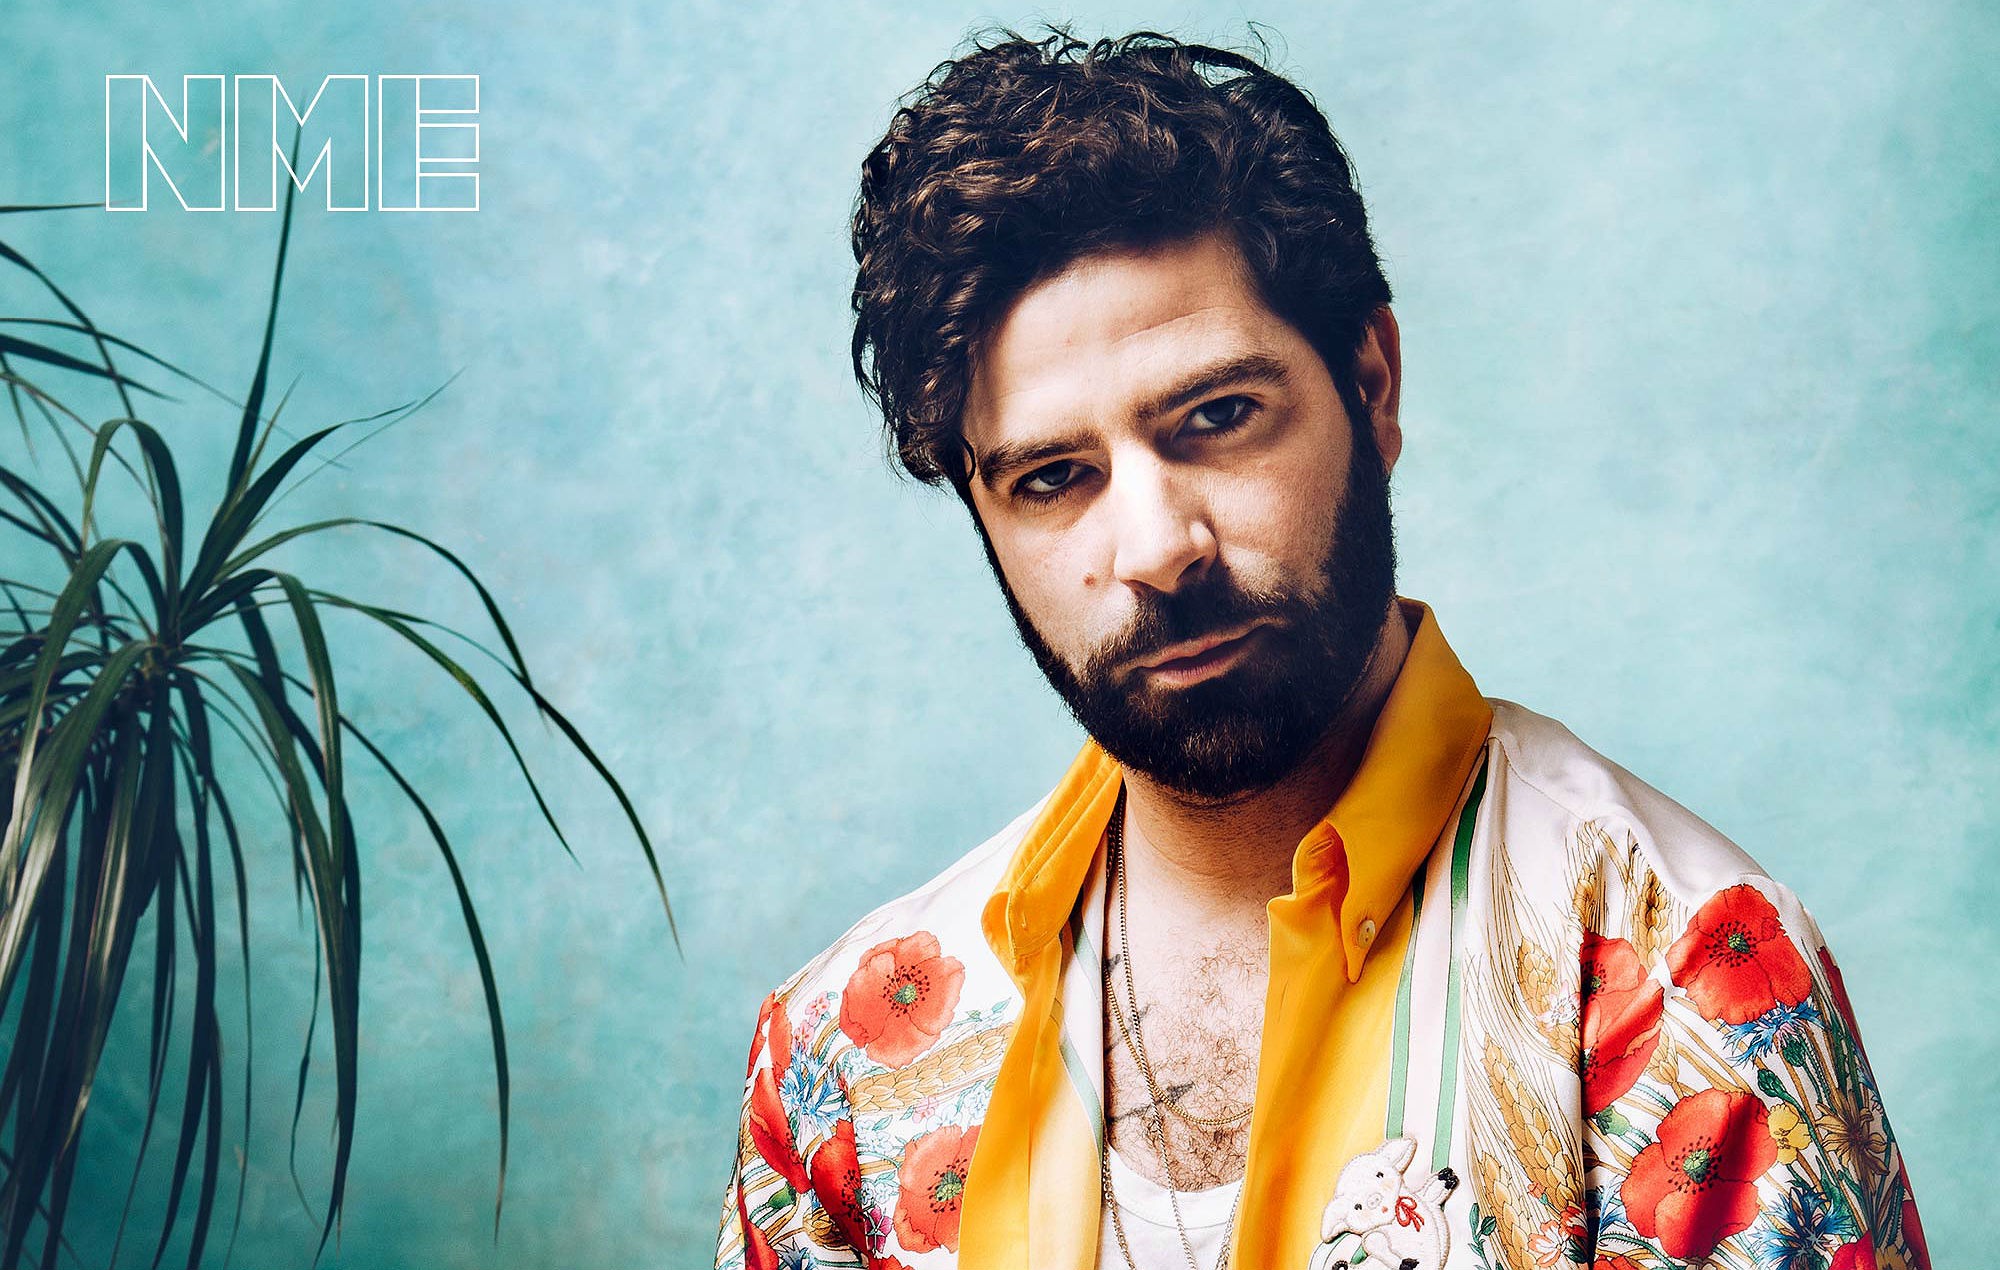 Foals’ Yannis Philippakis: “It’s perfectly fine to just sit around and do fuck all”